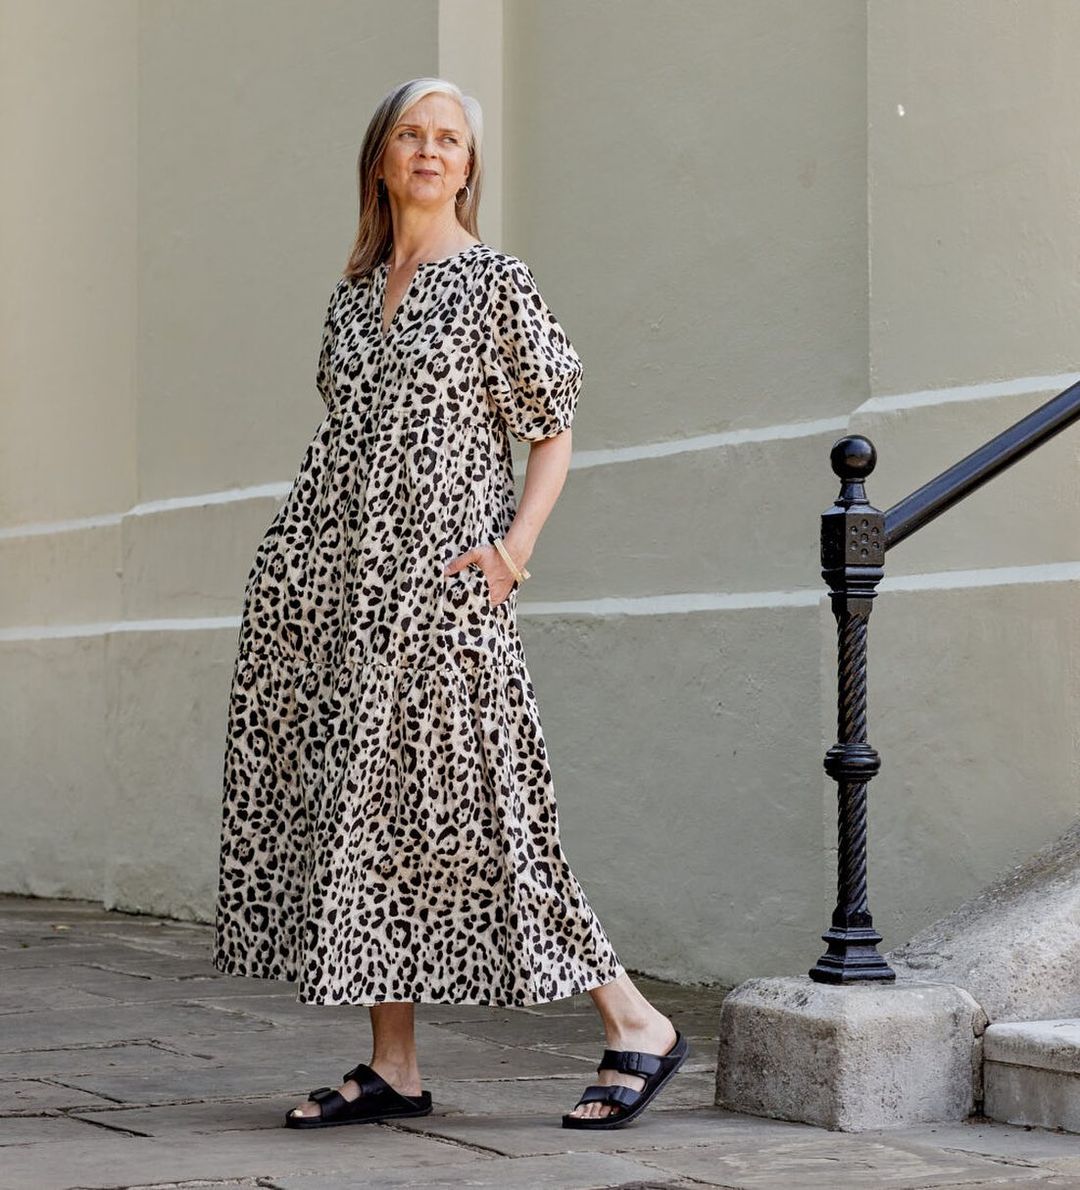 Easy breezy summer dresses — That’s Not My Age